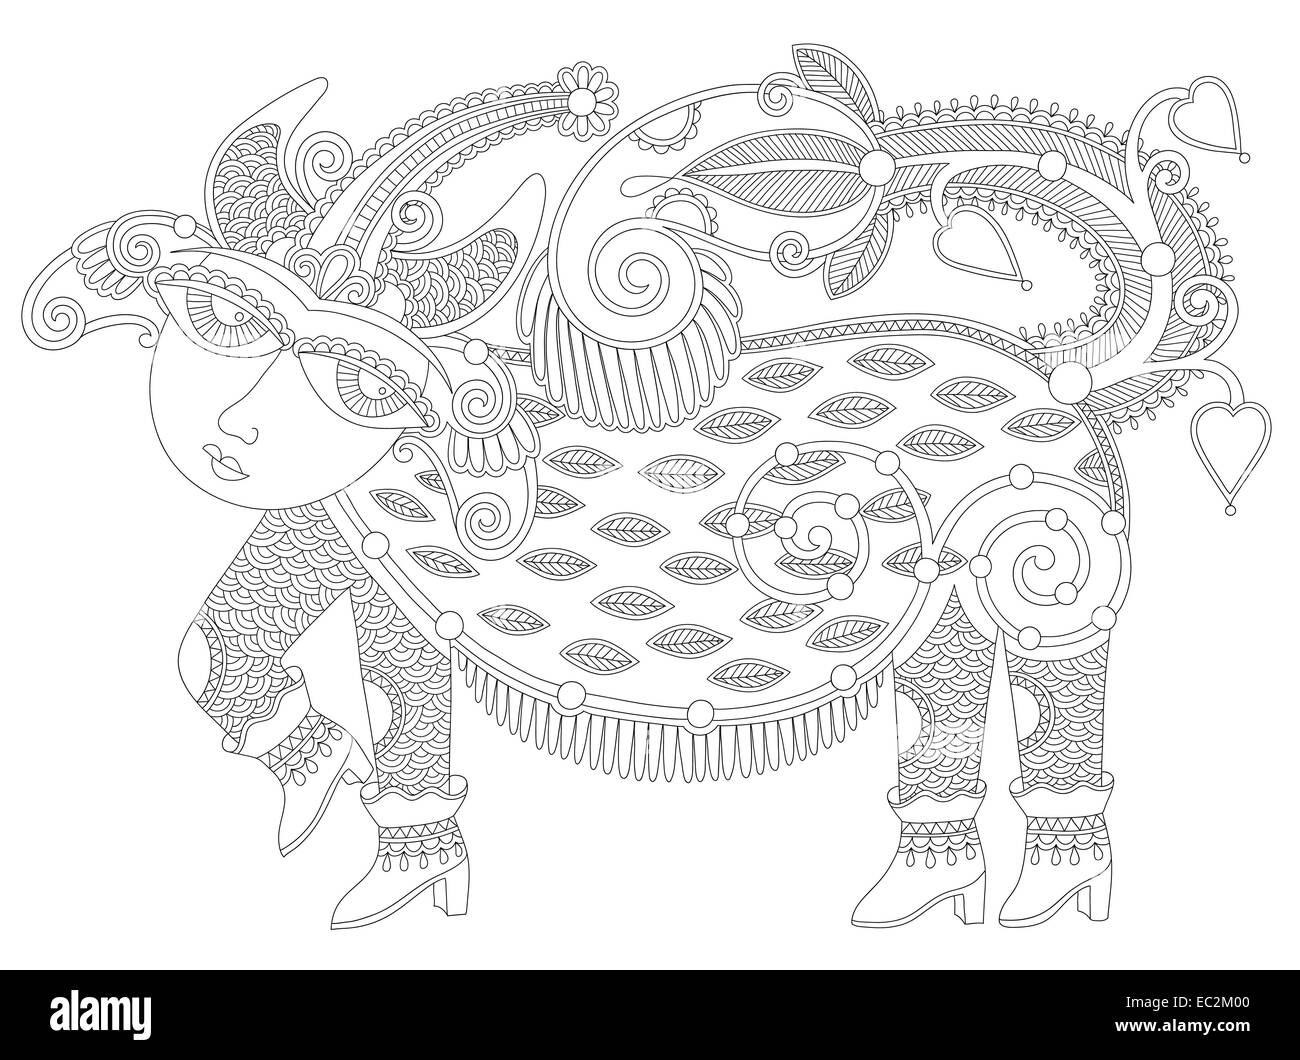 black and white unusual fantastic creature in decorative ukrainian karakoko style for coloring book for adults - relaxation, vec Stock Photo